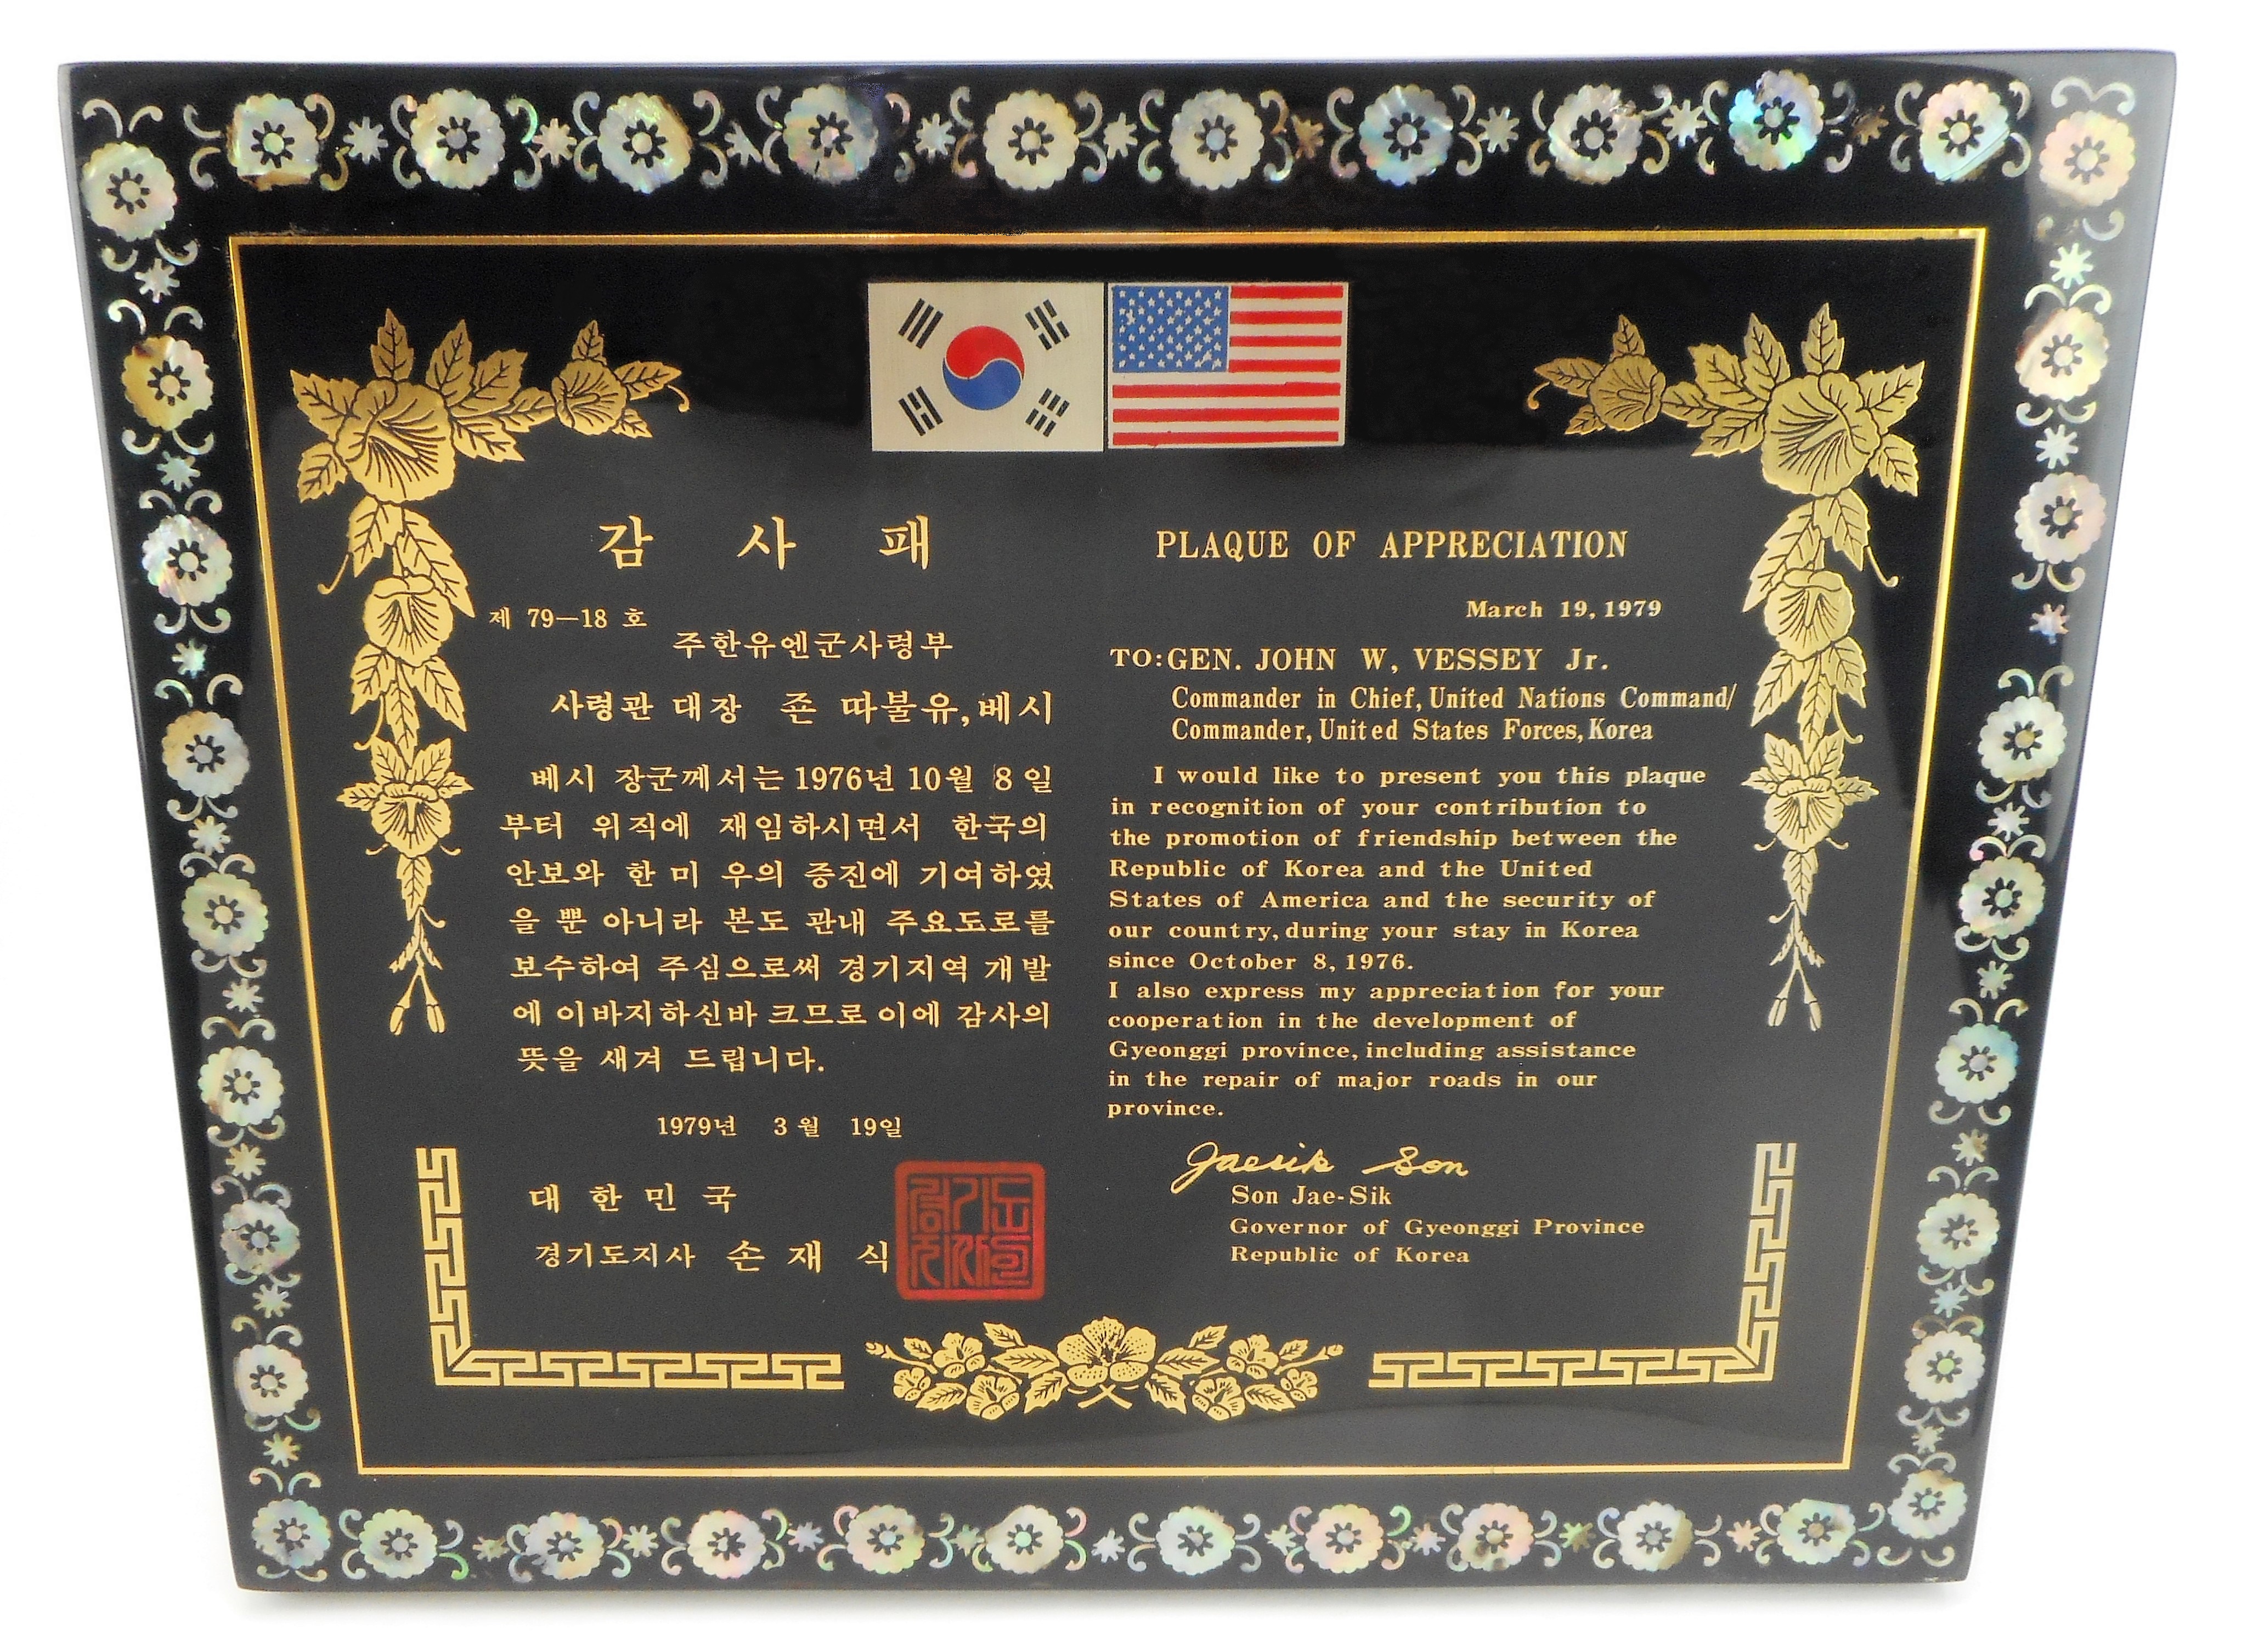 Plaque of Appreciation from Governor of Gyeonggi Province, Son-Jae Sik (South Korea), 19 March 1979